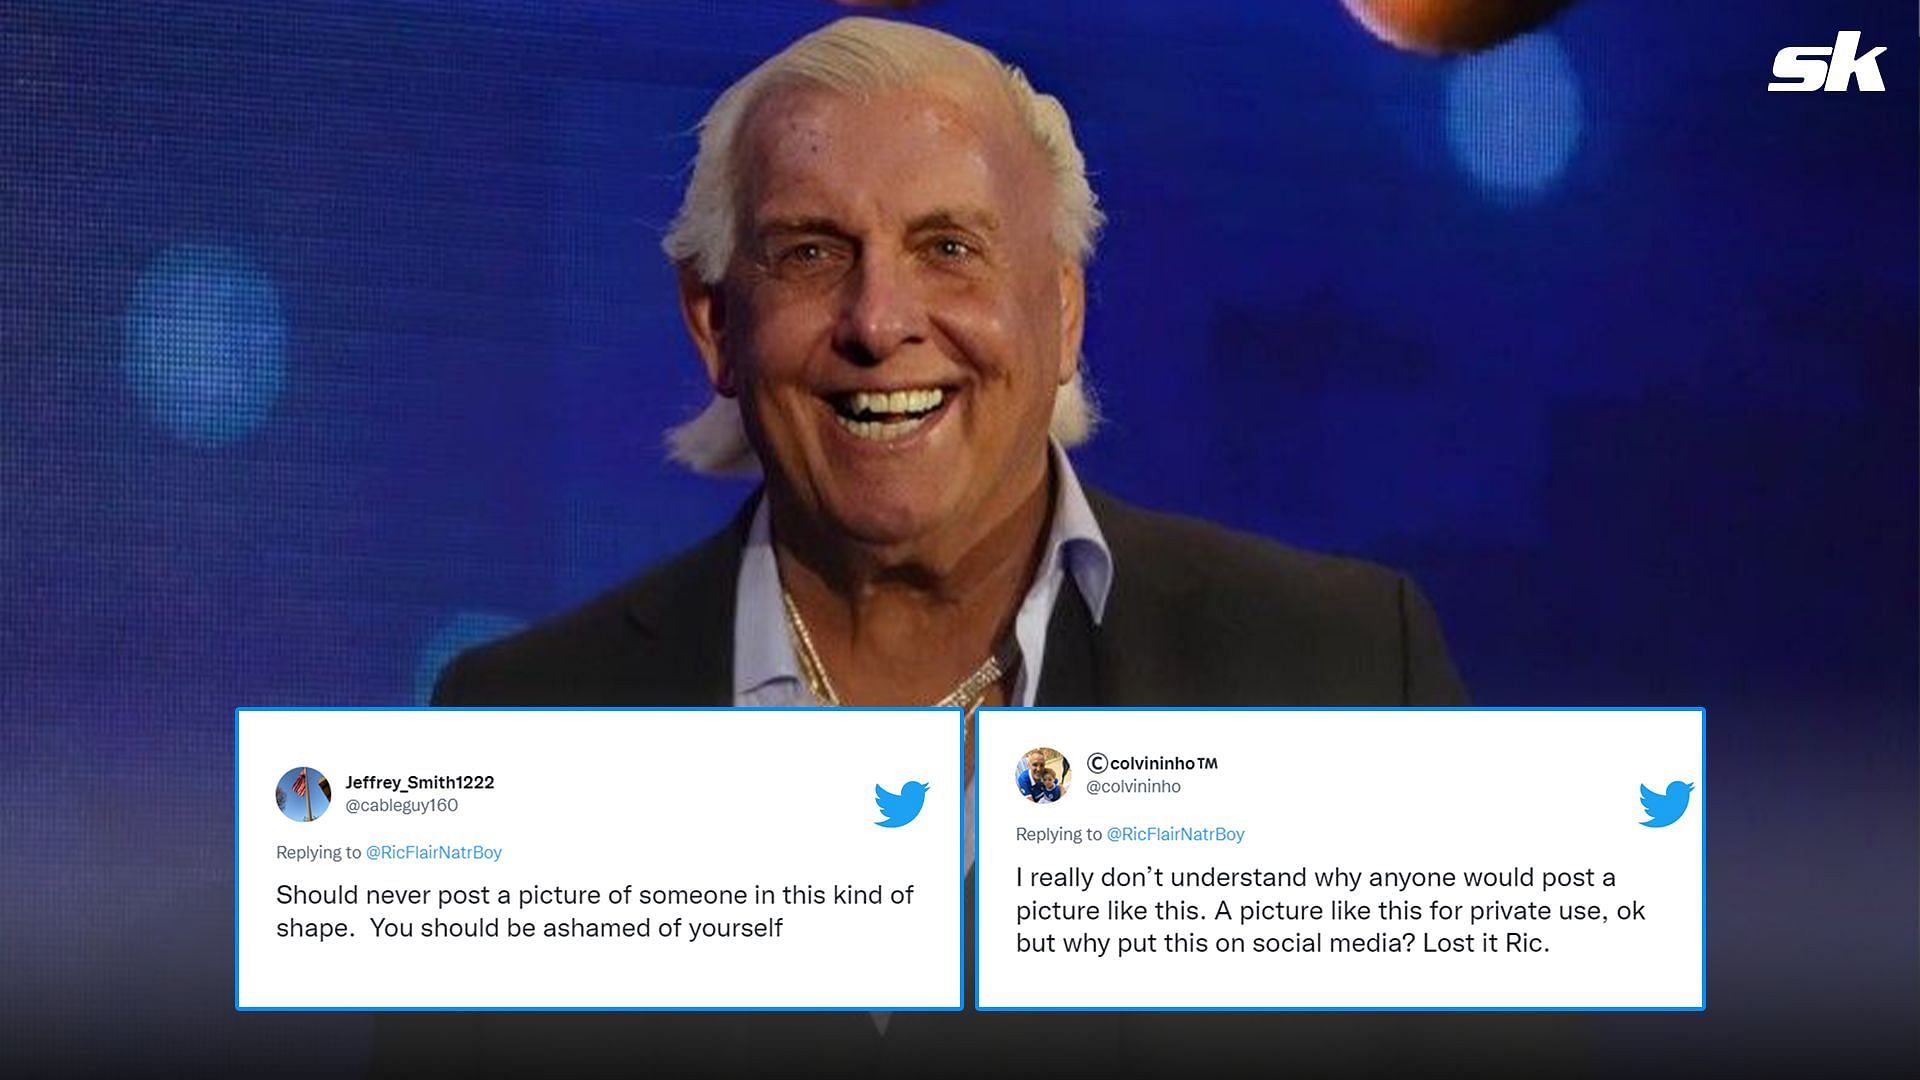 Fans were not happy about Ric Flair posting a picture of Steve McMichael, who is battling ALS